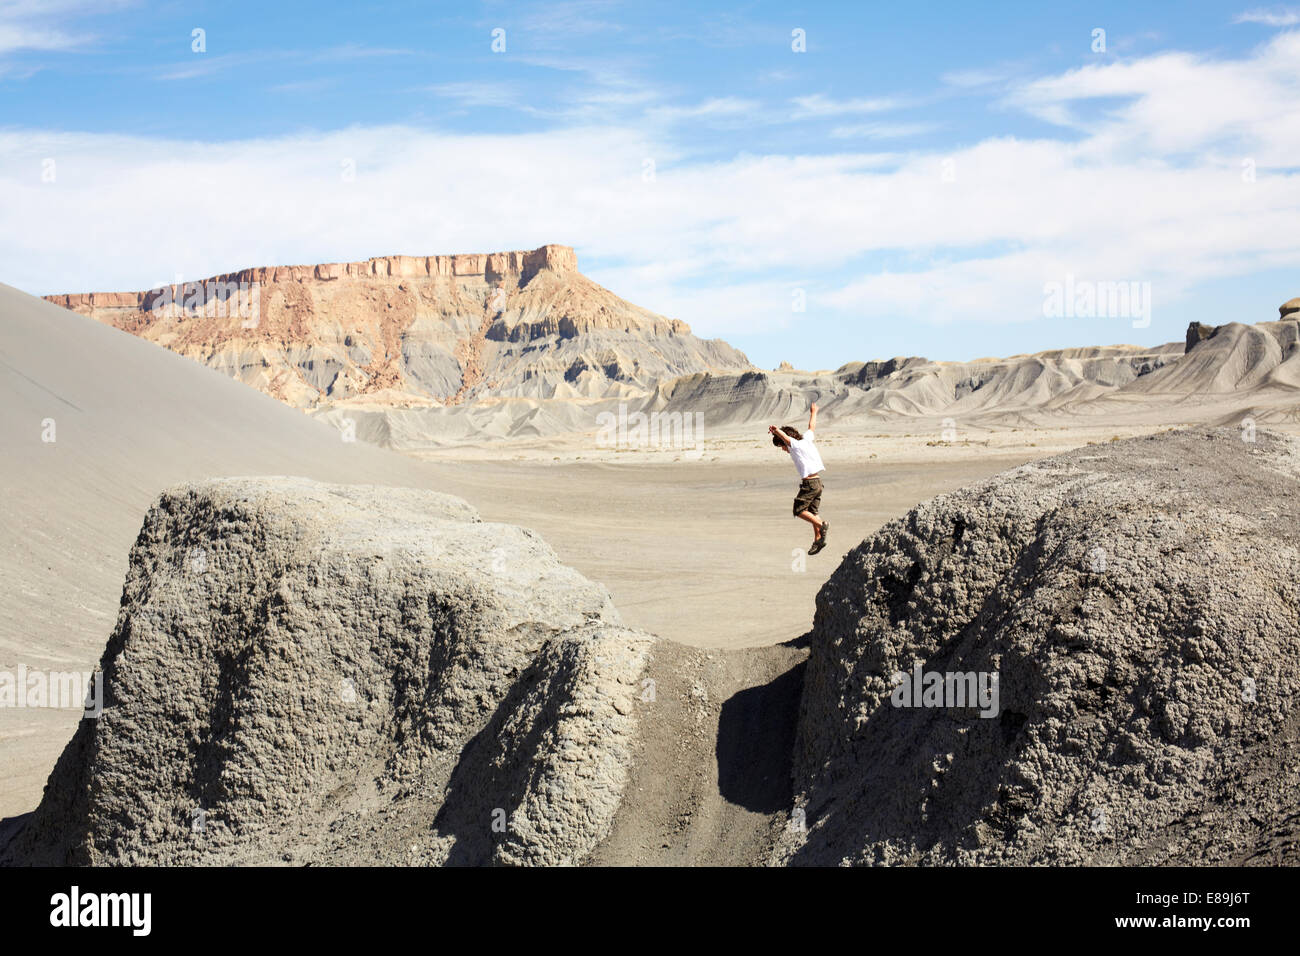 Boy jumping from rocks in the desert Stock Photo